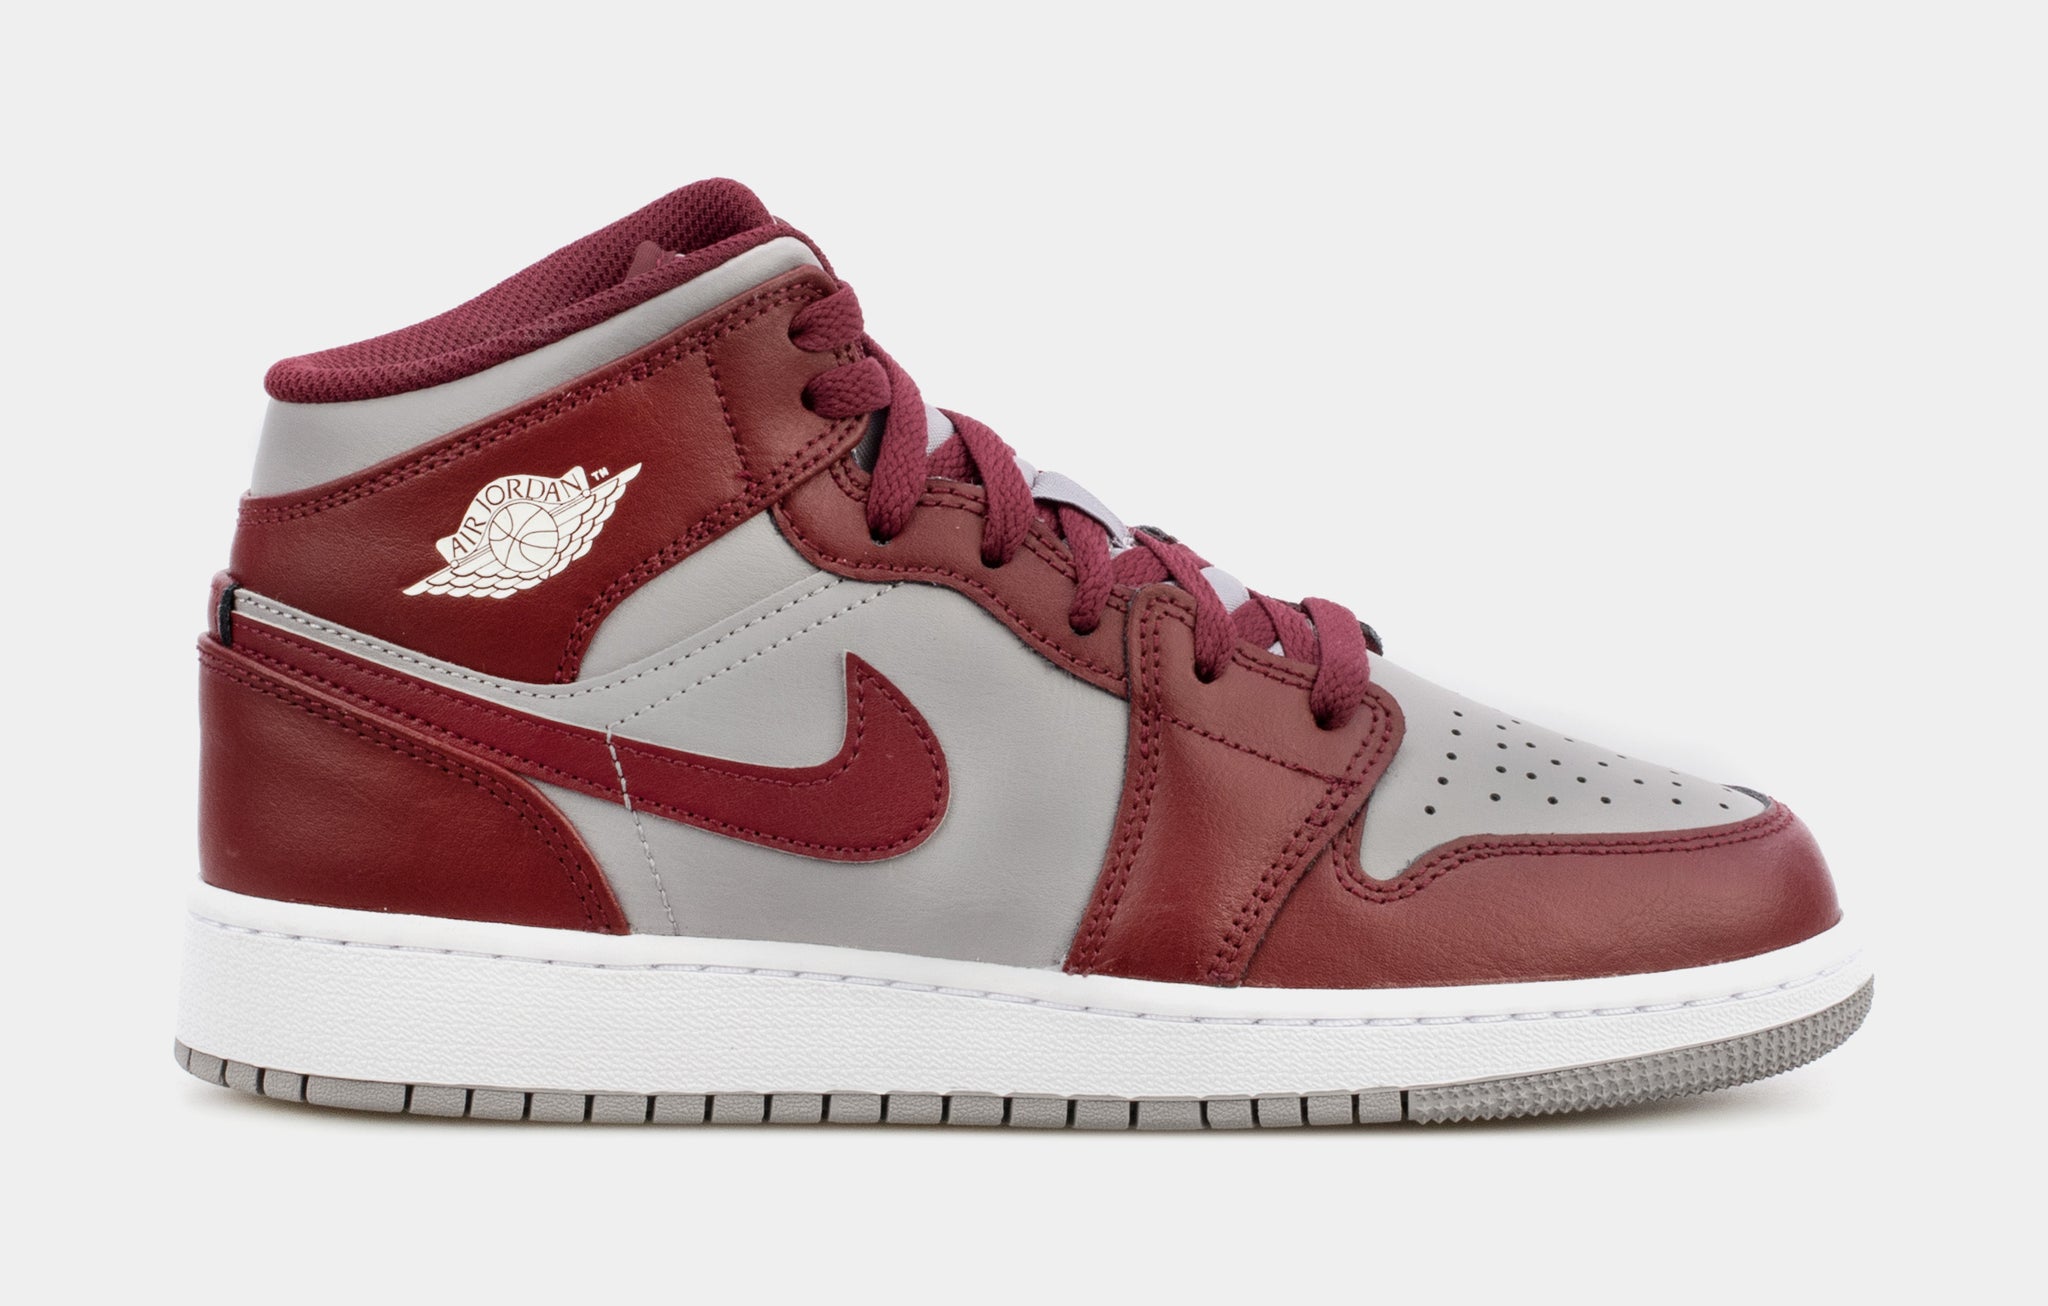 Air Jordan 1 Mid Cherrywood Red Grade School Lifestyle Shoes DQ8423-615 – Shoe Palace